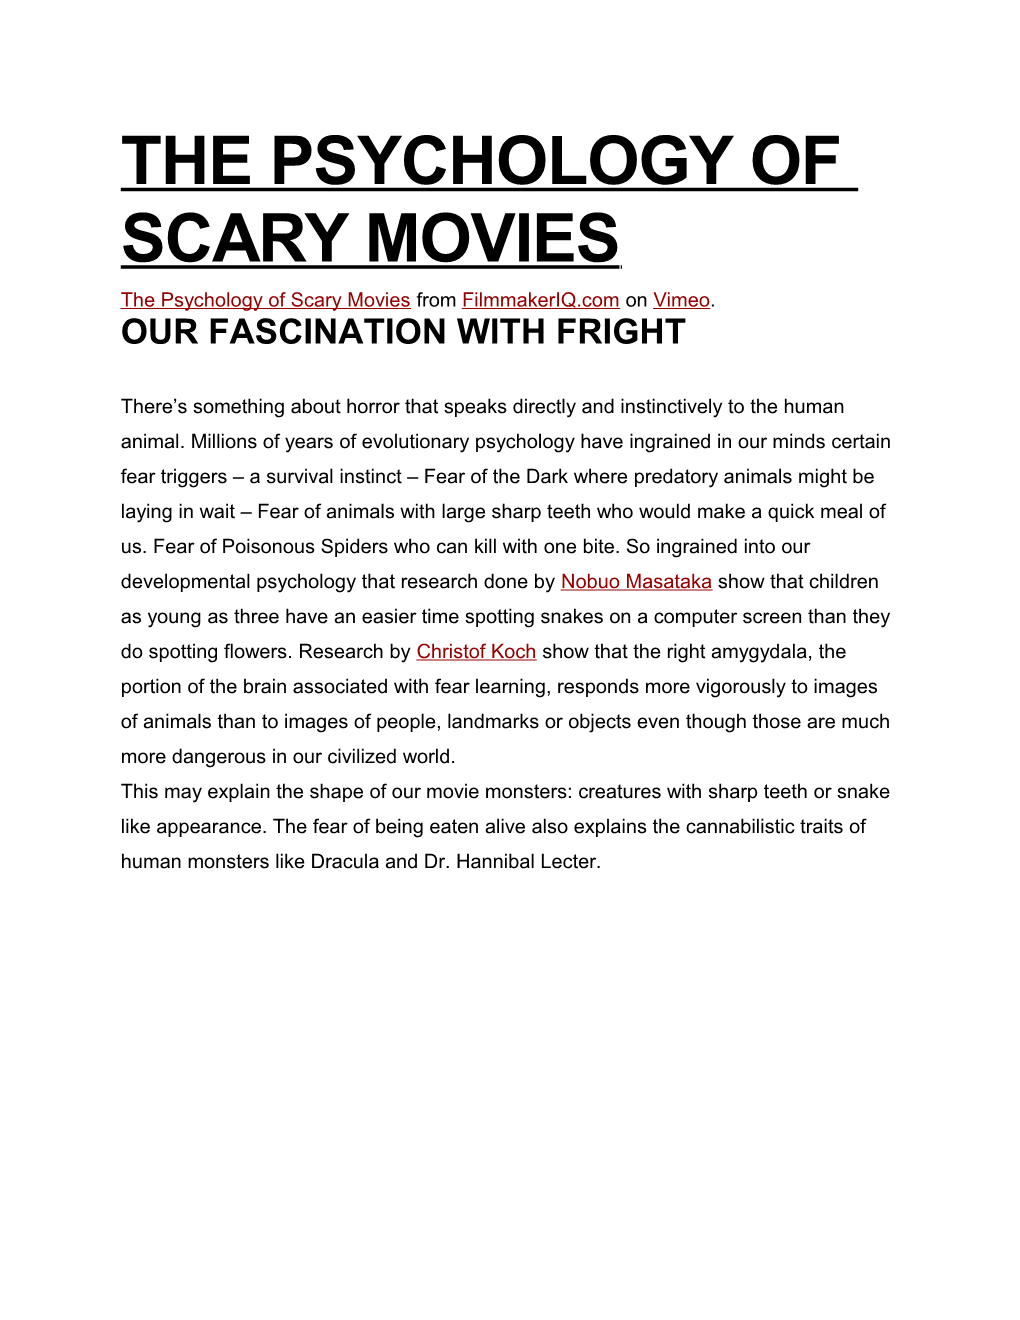 The Psychology of Scary Movies